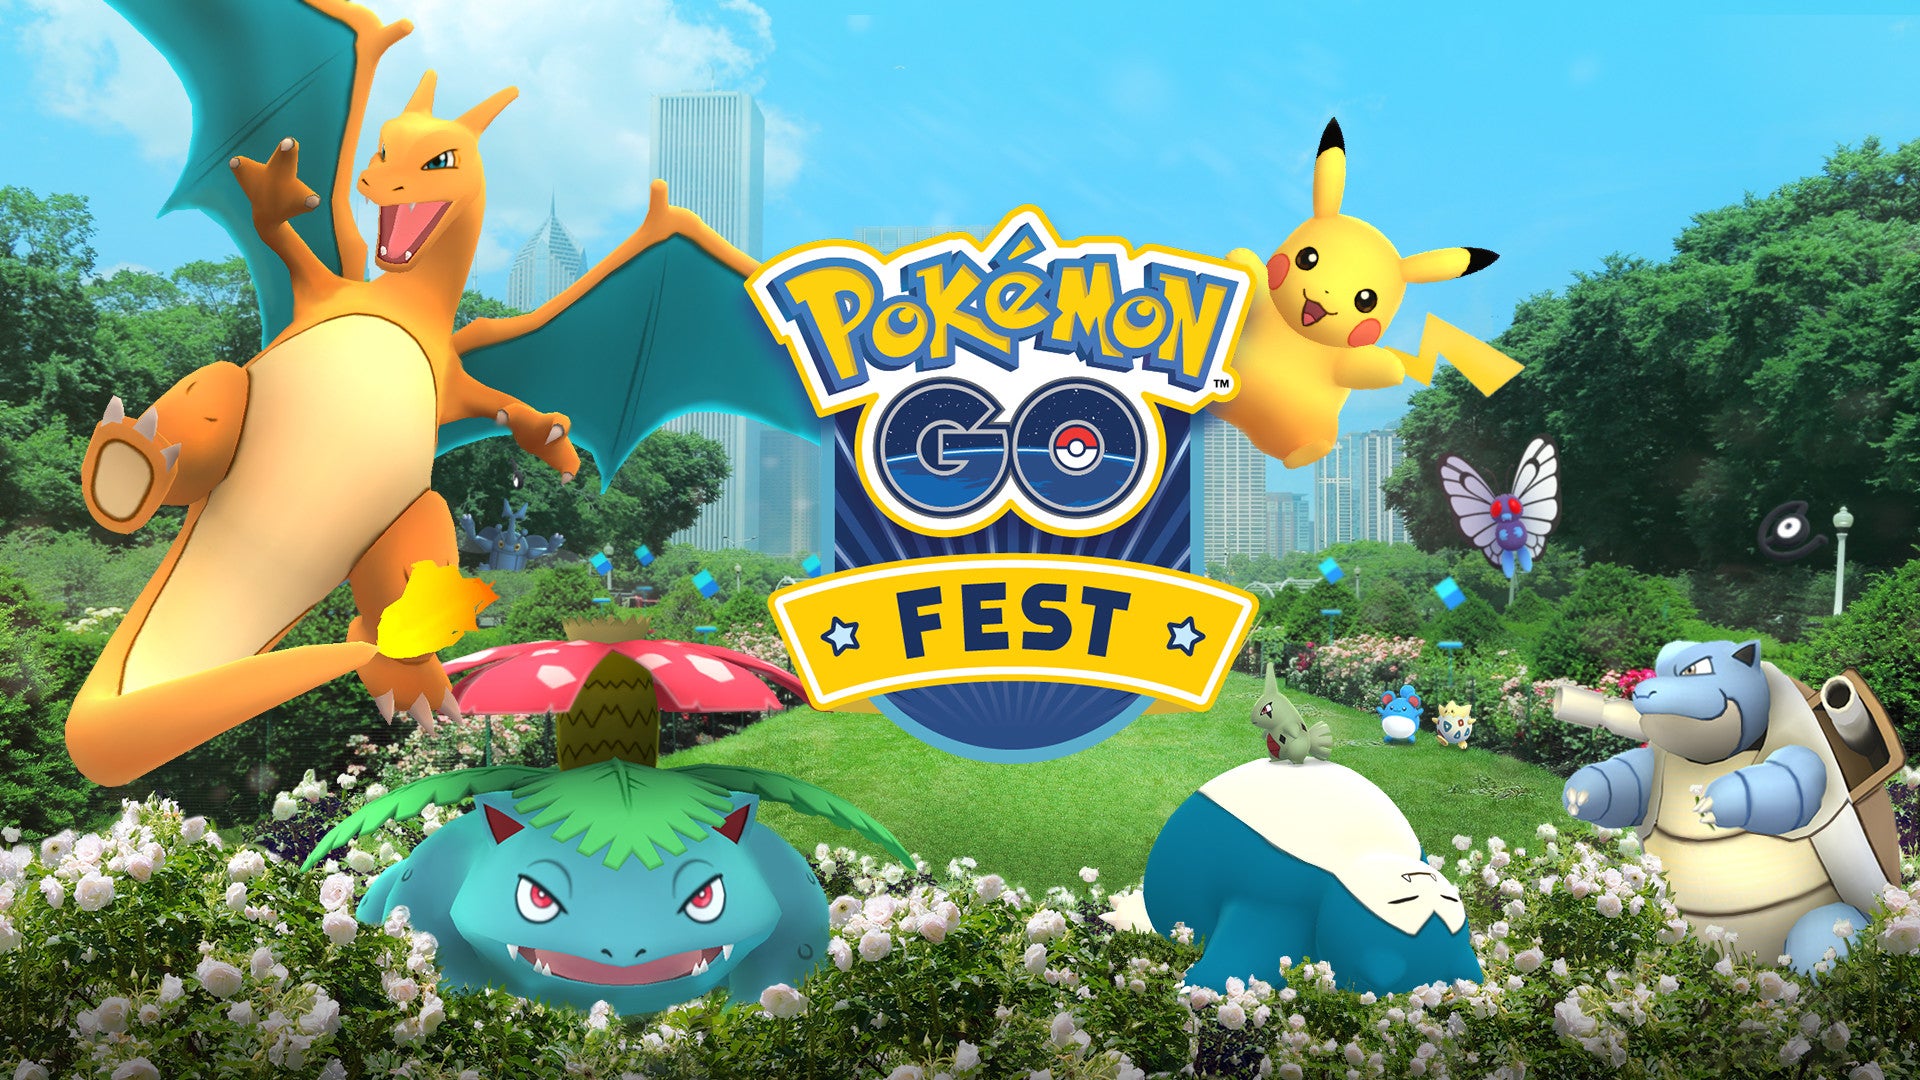 Pokemon GO Fest refunds all tickets due to connectivity issues, but is that enough?